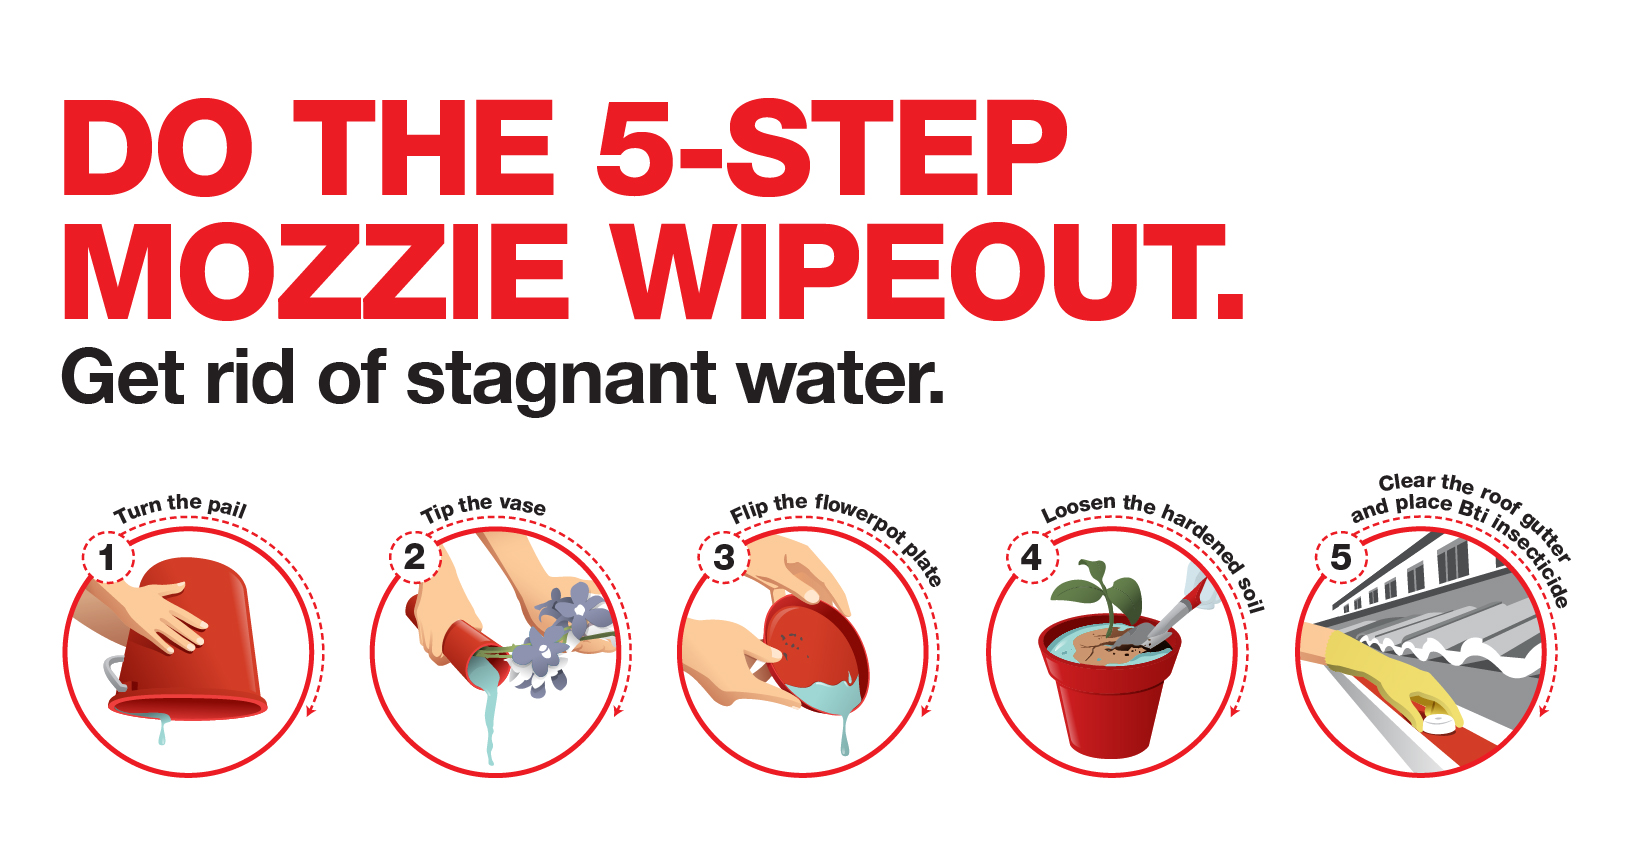 big banner of 5 steps to wipeout mosquito